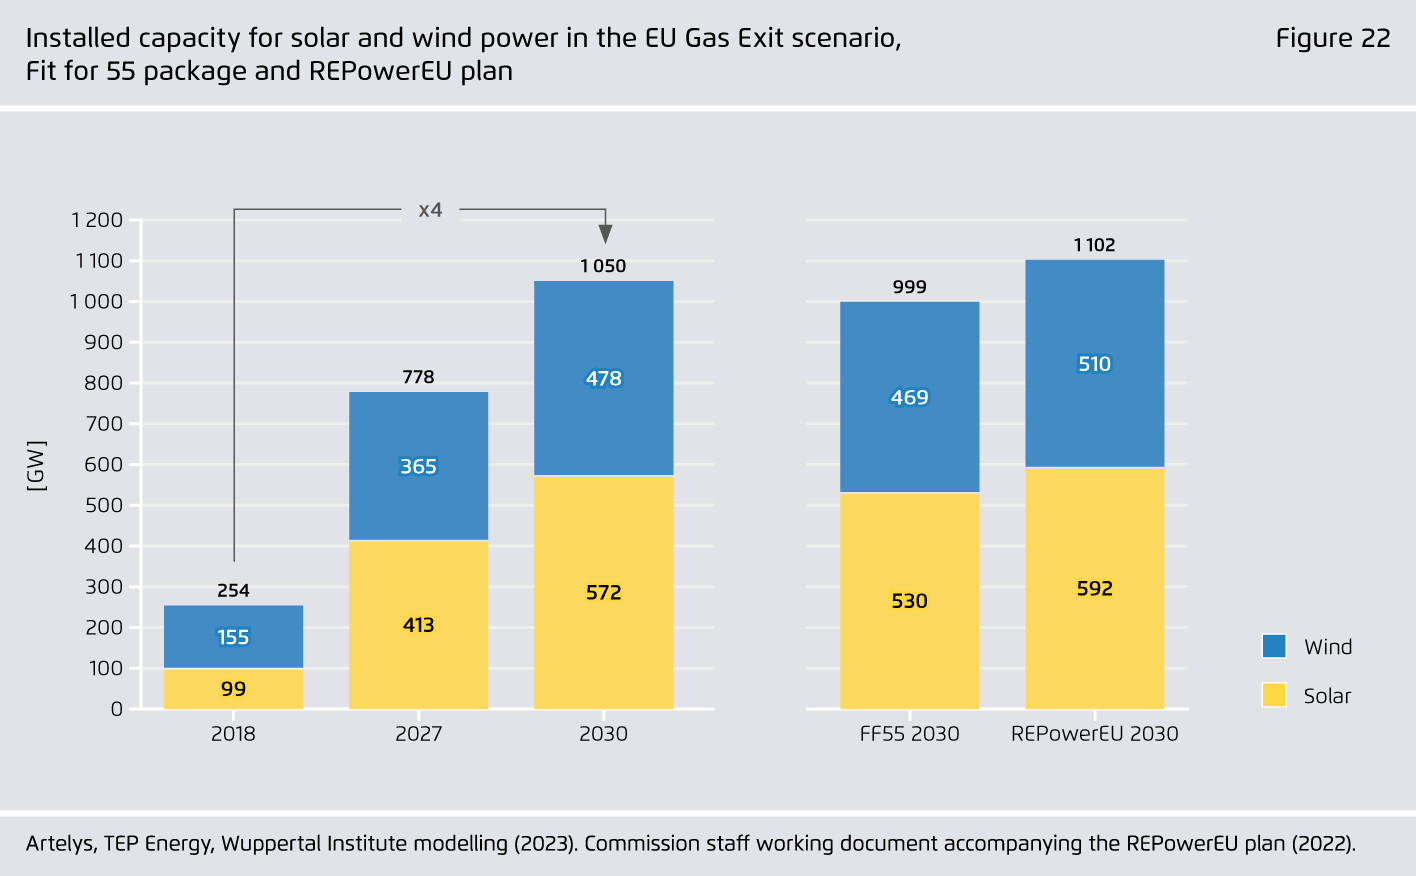 Preview for Installed capacity for solar and wind power in the EU Gas Exit scenario, Fit for 55 package and REPowerEU plan